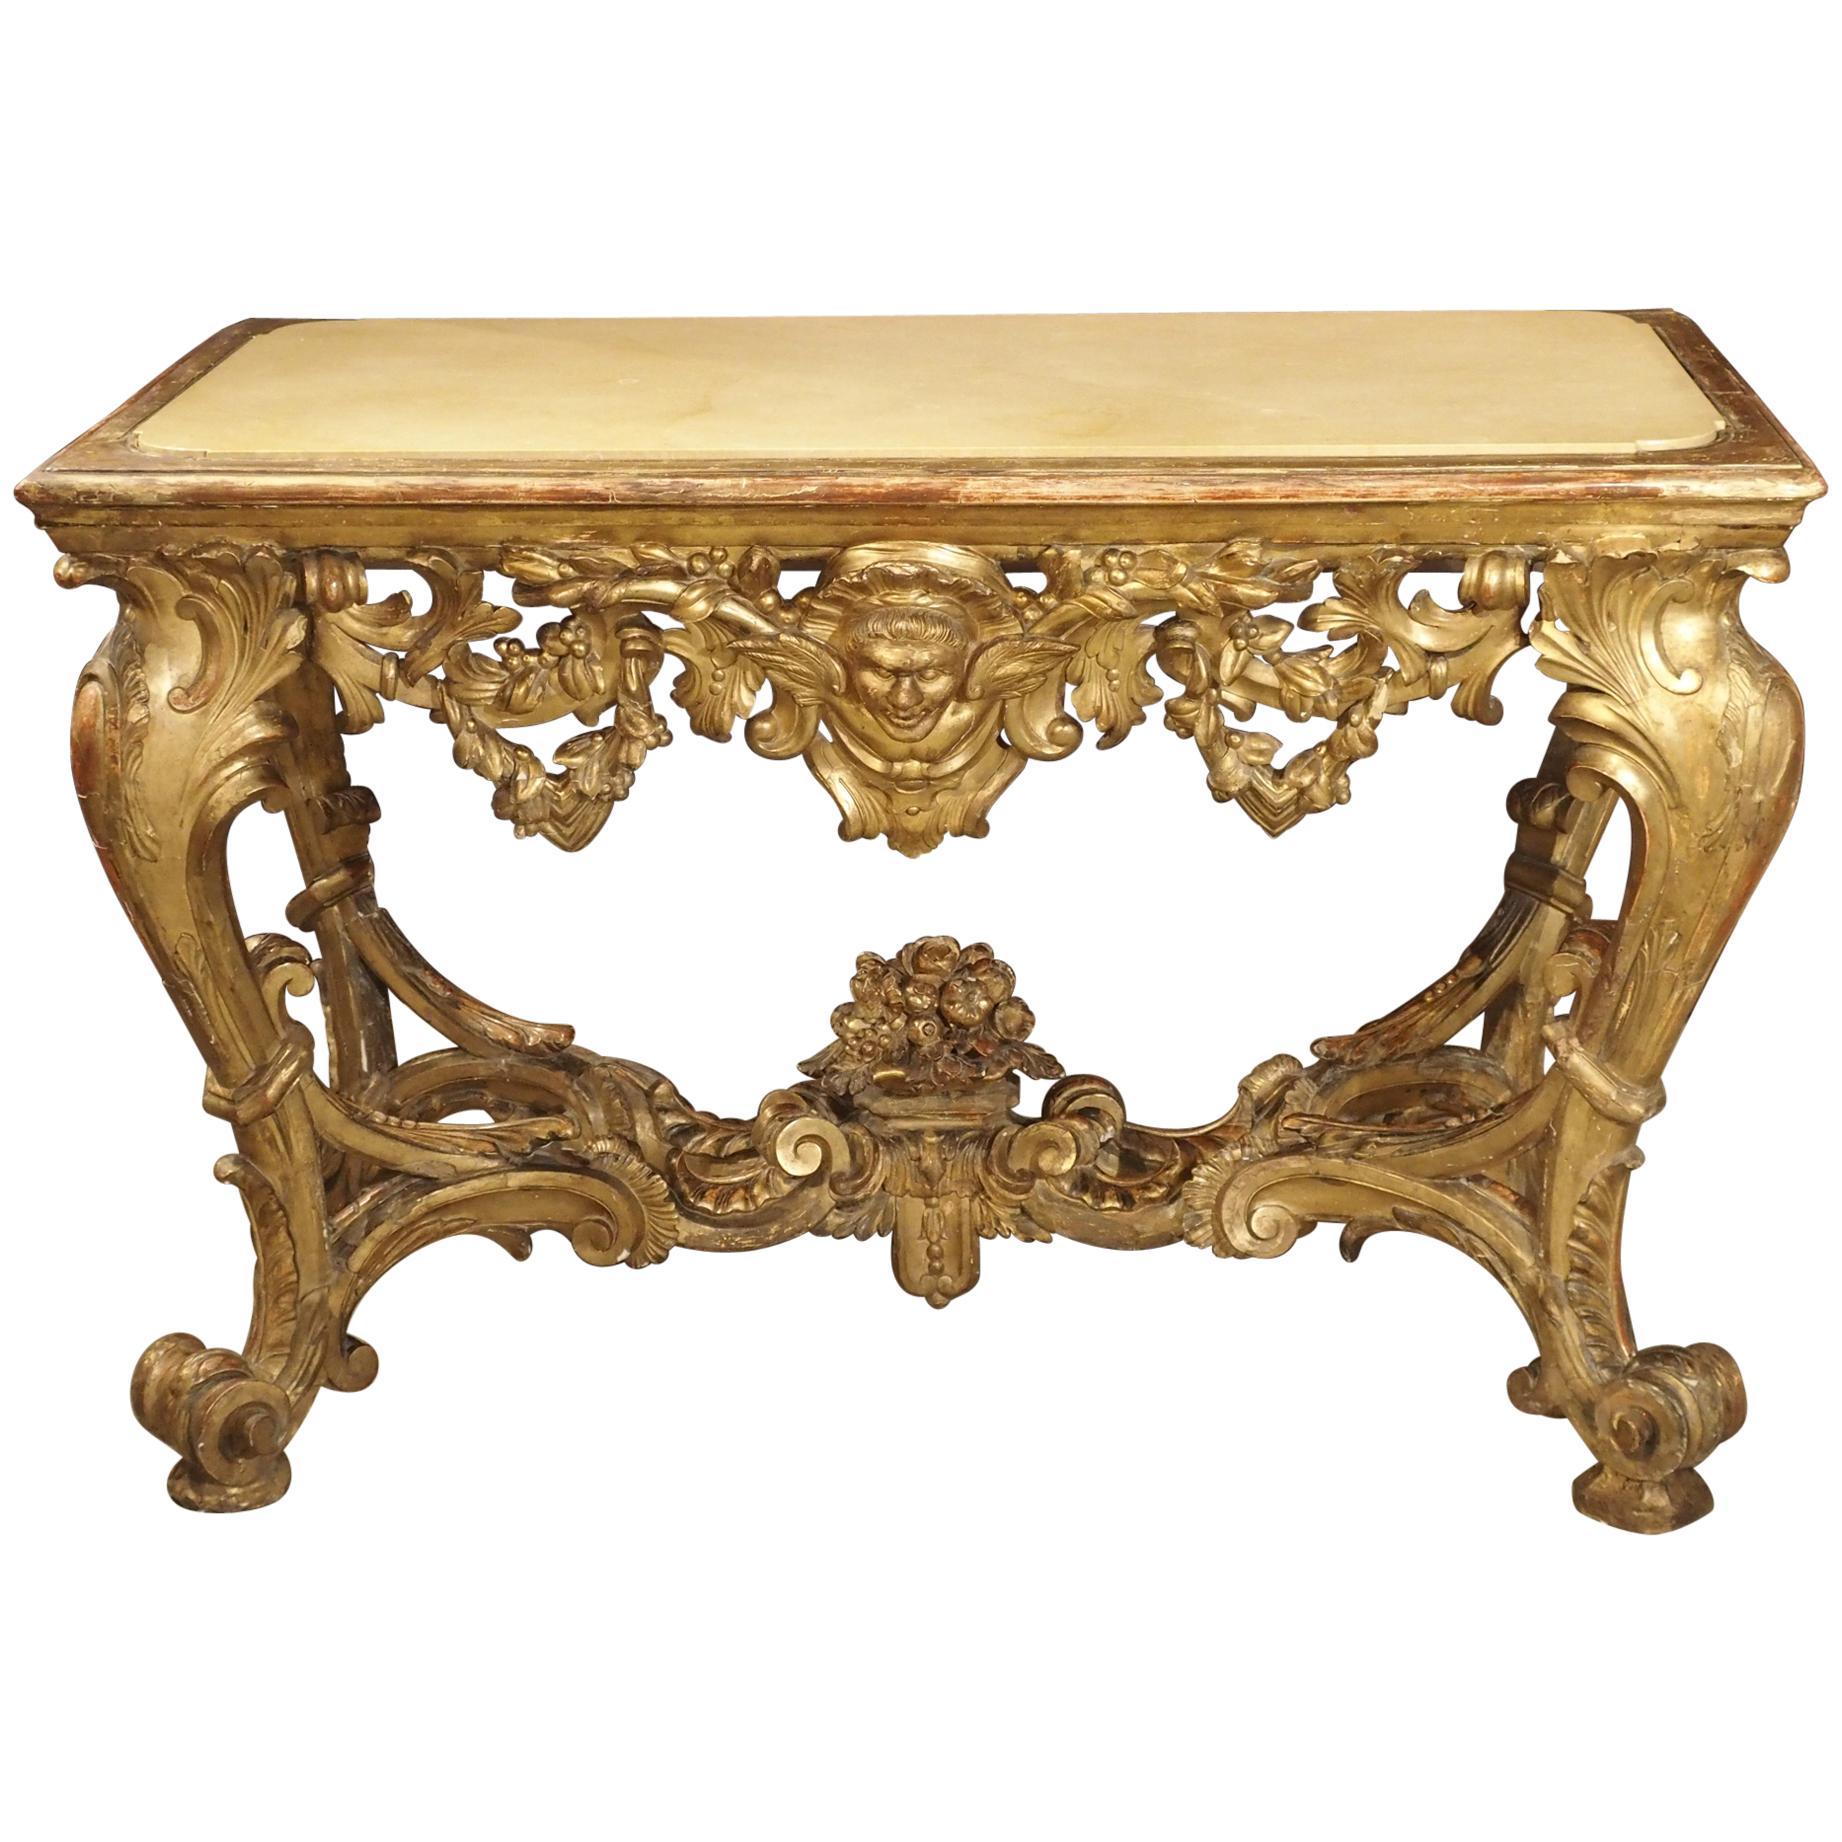 Late 17th Century Italian Giltwood Console Table with Inset Marble Top